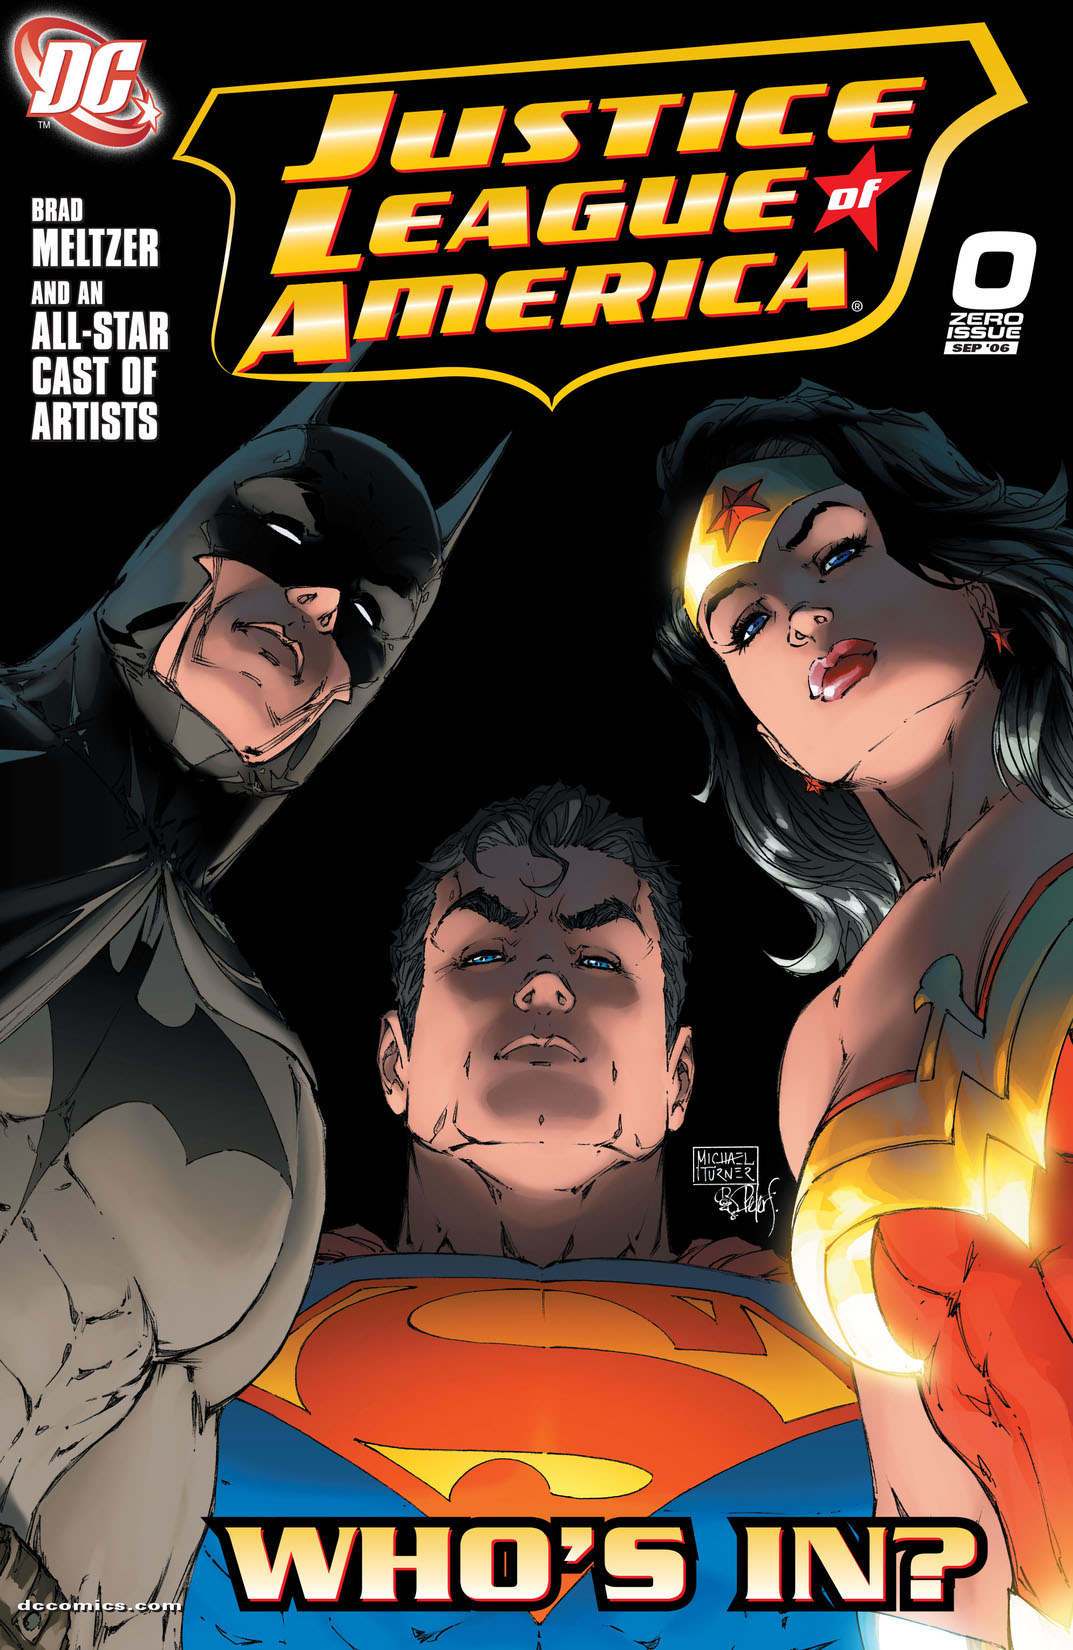 Justice League of America (2006-) #0 preview images